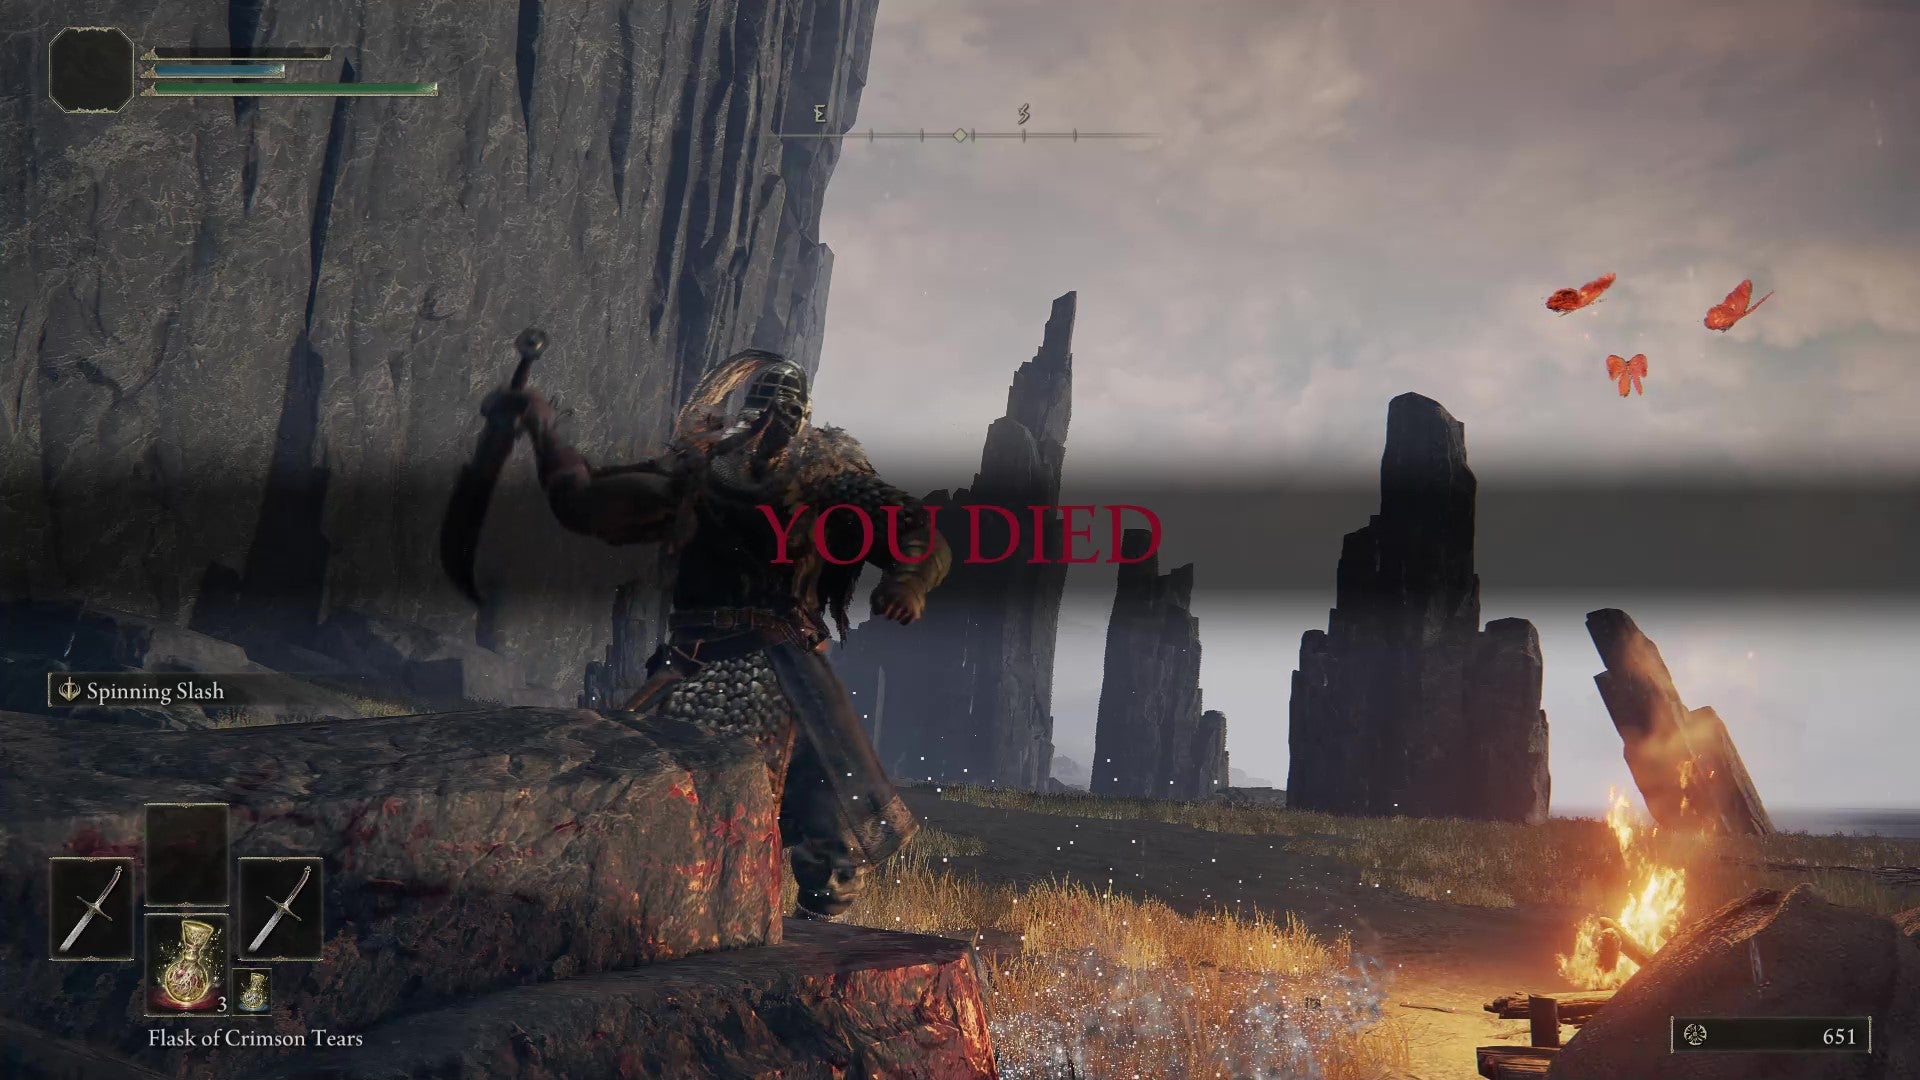 The iconic Soulsborne YOU DIED text, over an Elden Ring minion killing a player character.